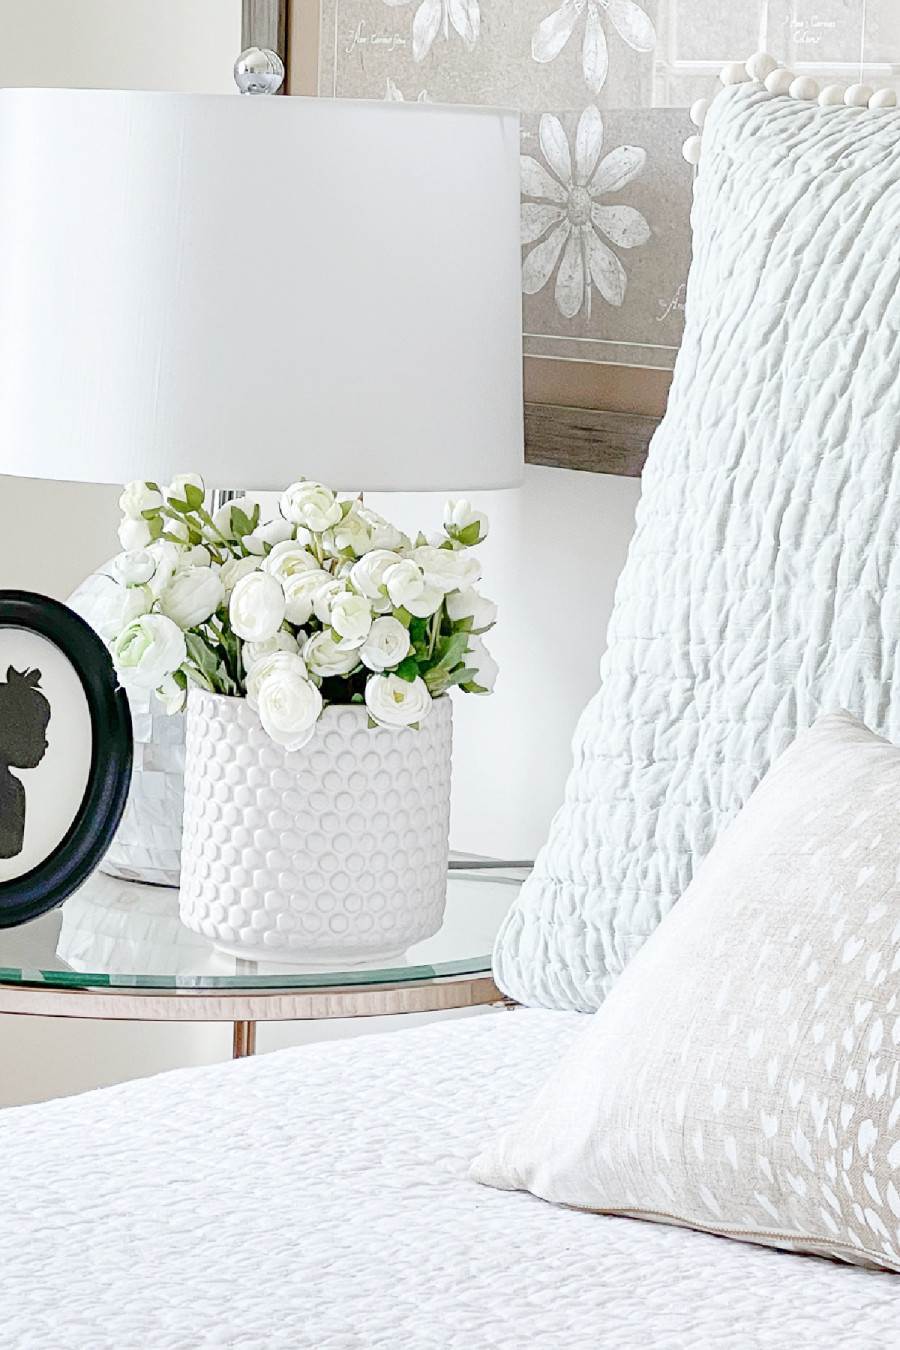 HOW TO DECORATE A NIGHTSTAND